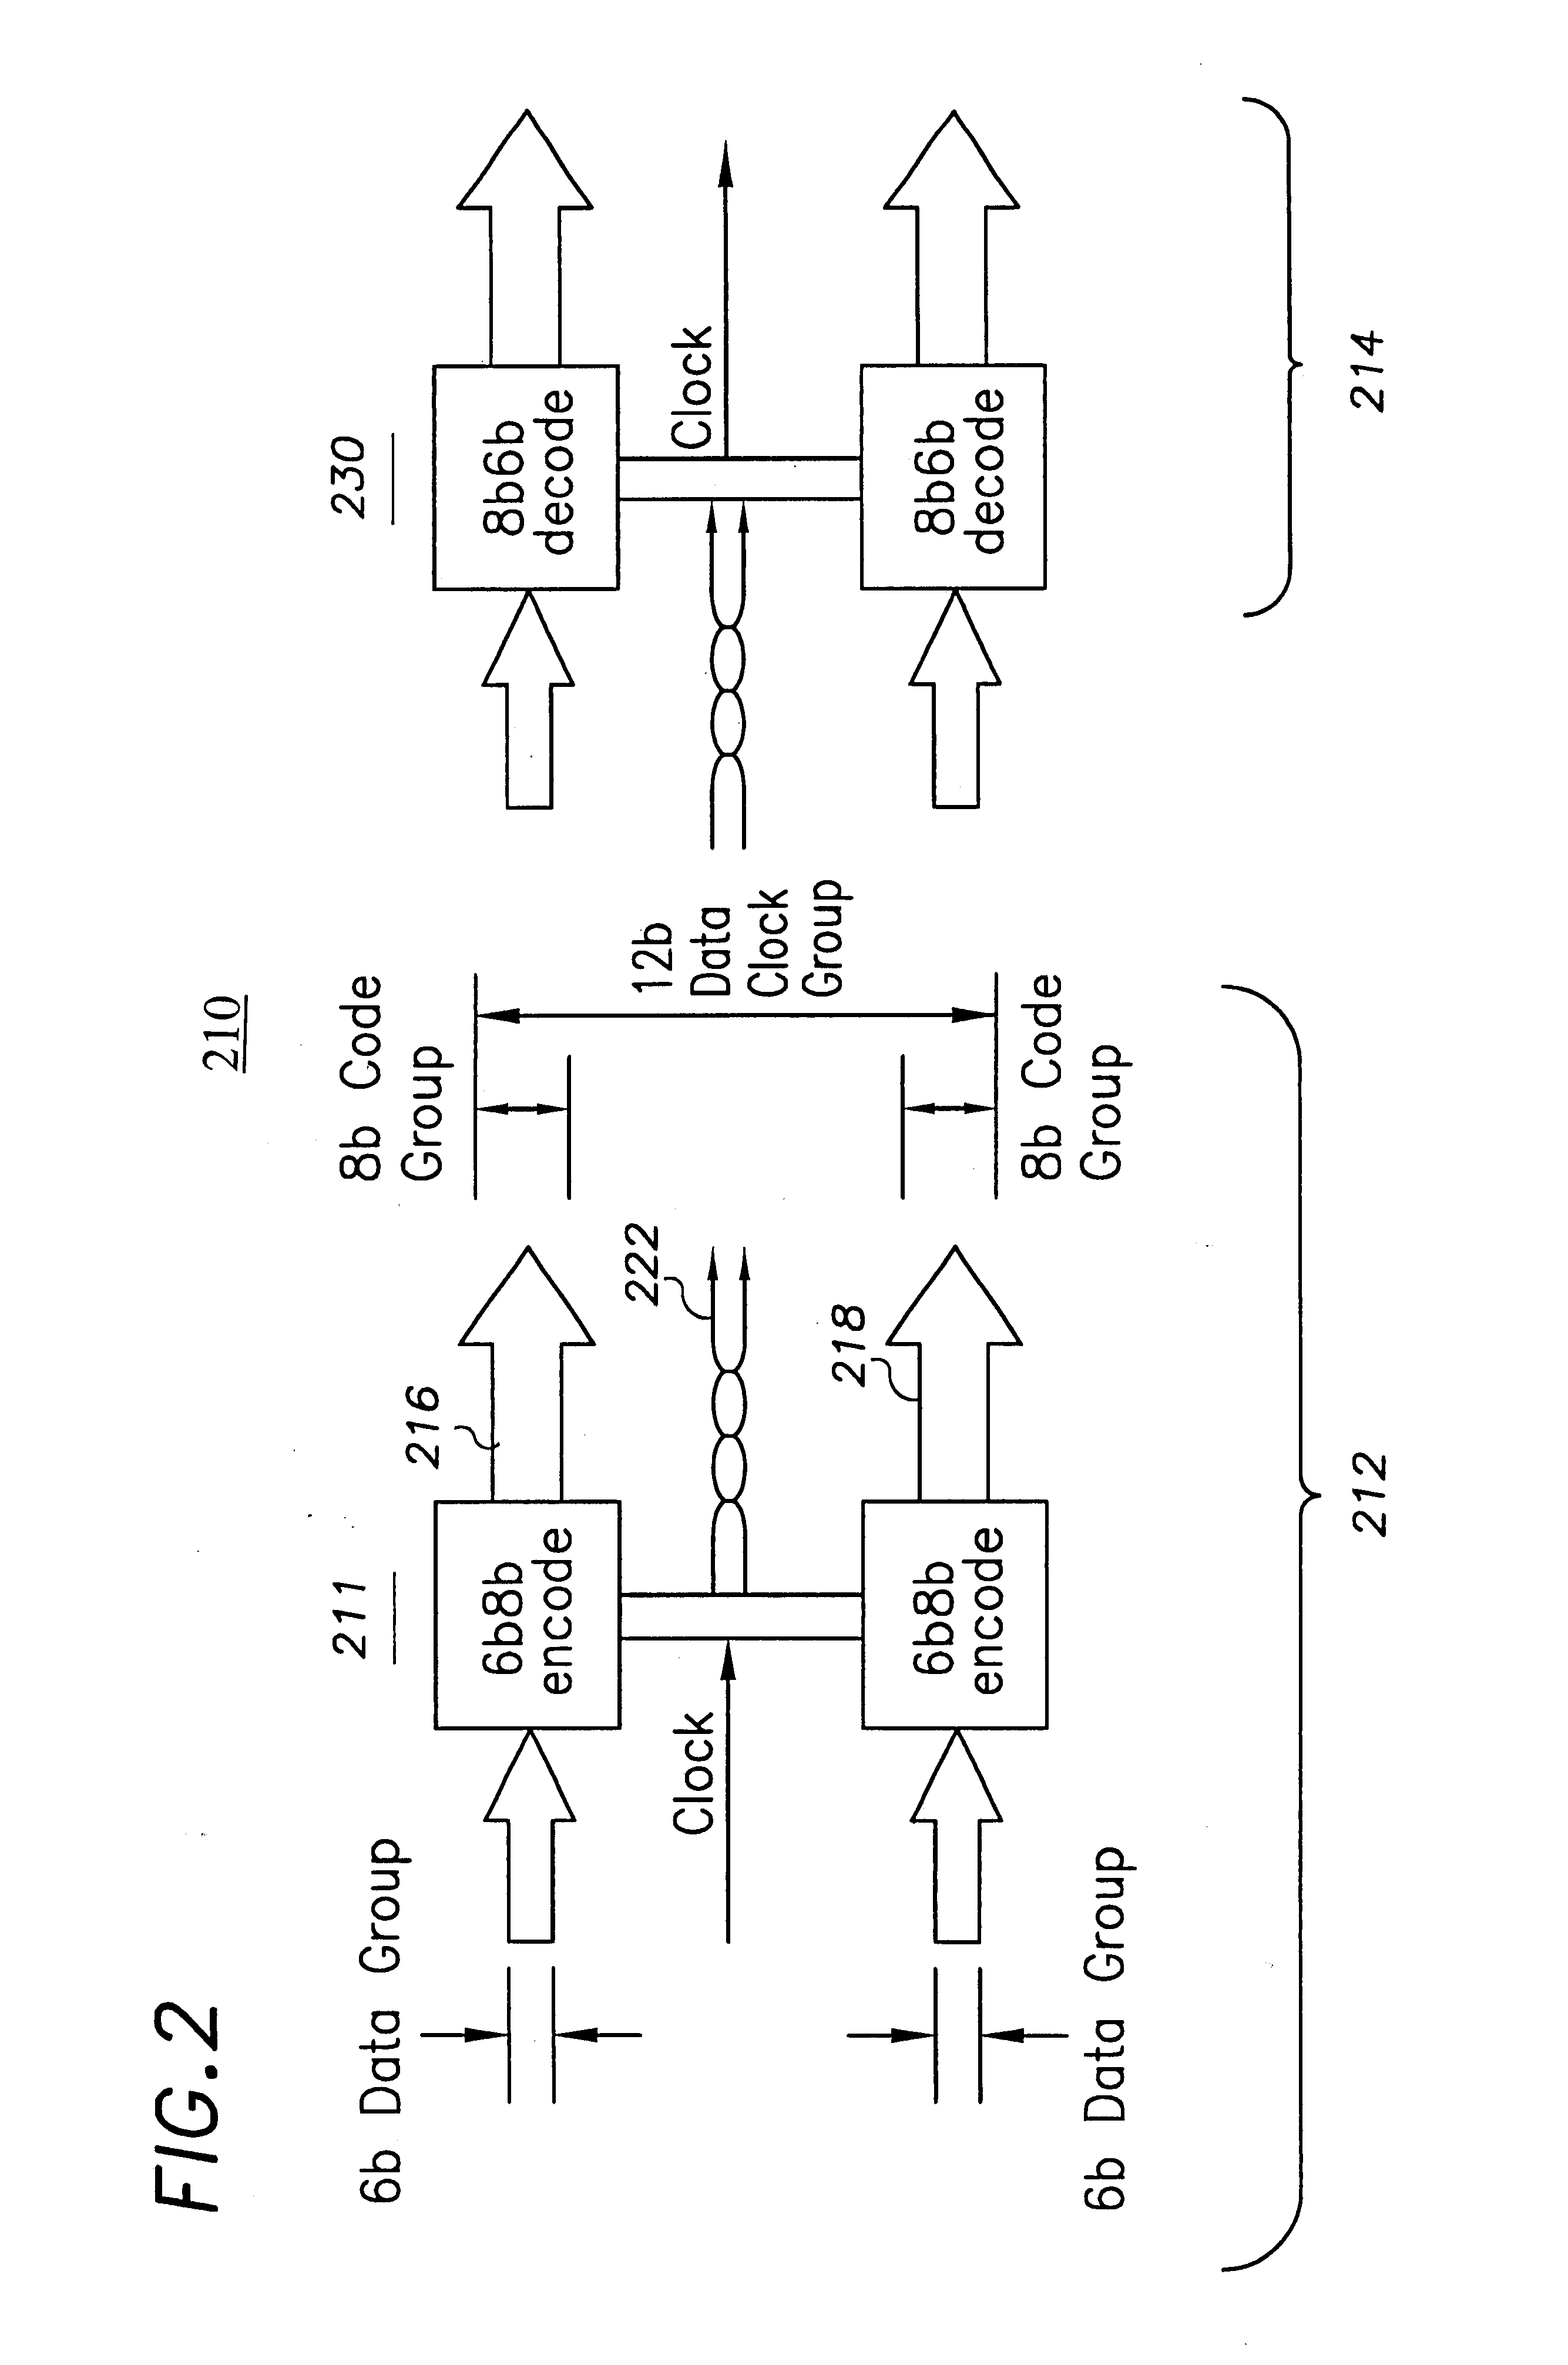 Parallel data communication consuming low power